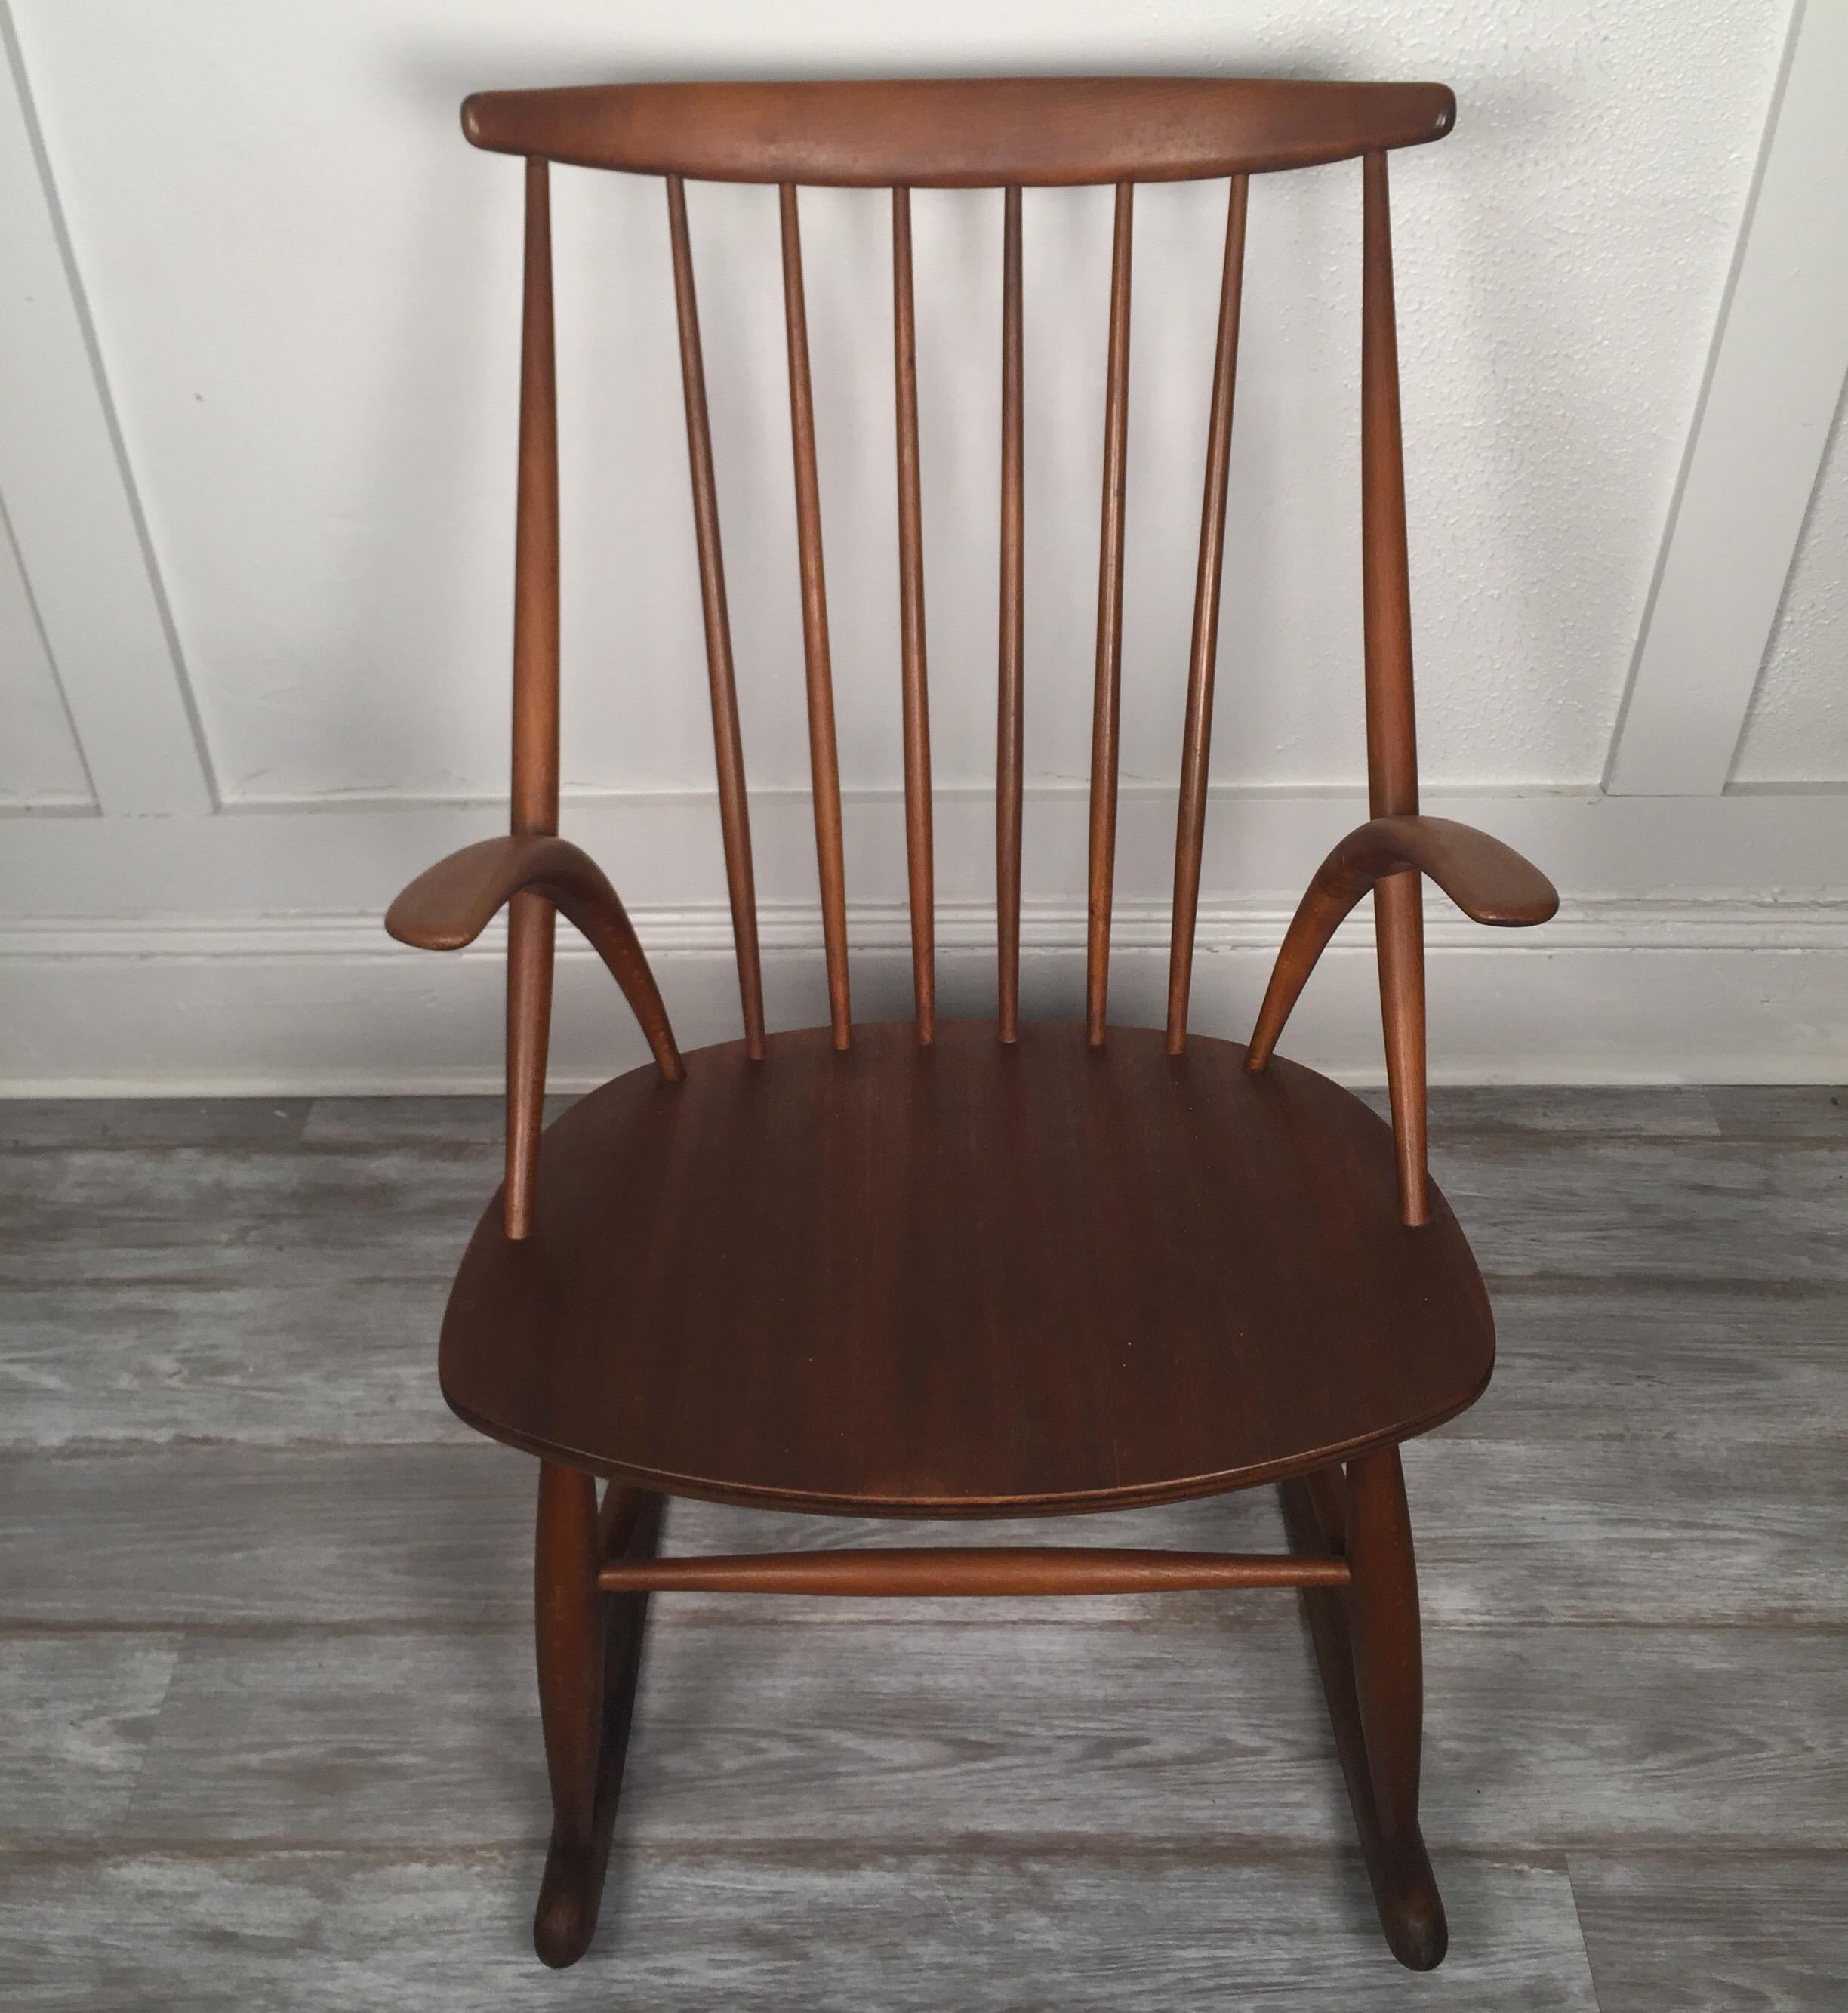 This rocking chair be Illum Wikkelsø for Neils Eilersen shows off the organic and subtractive design features that are hallmarks of Danish design in the mid-20th century. It features a solid stained beech frame and a molded mahogany plywood seat.